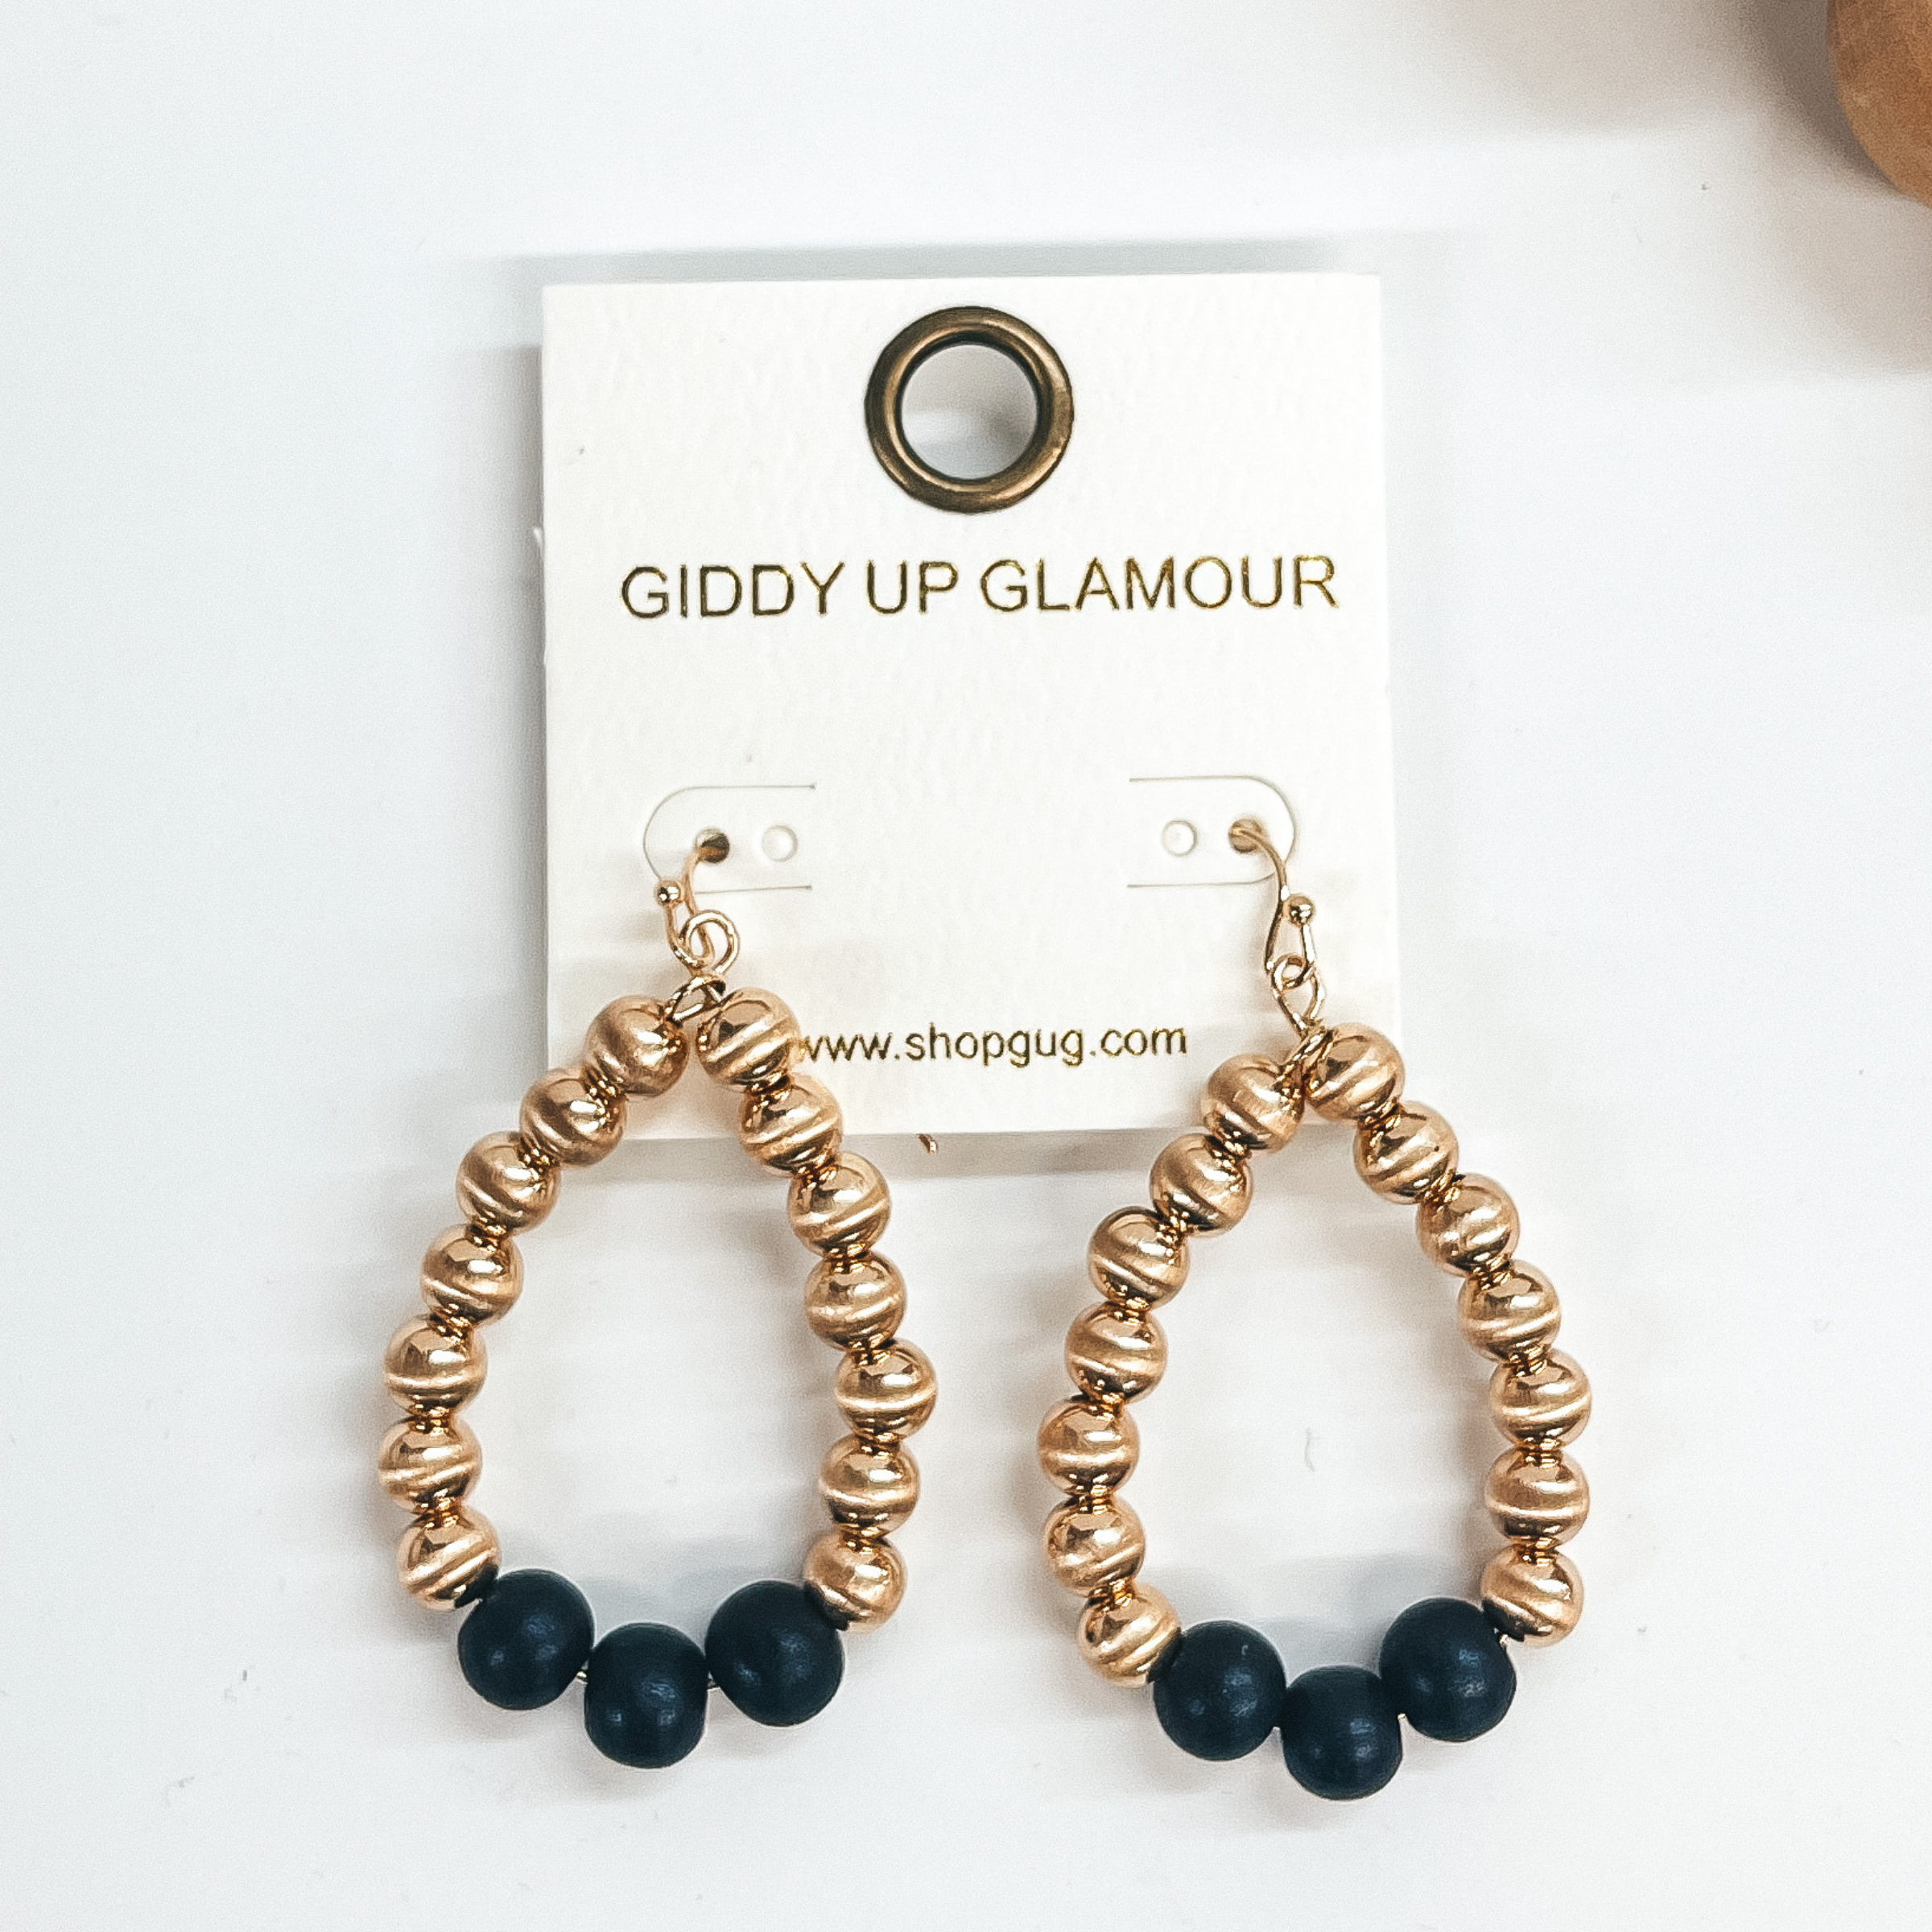 Gold big beaded teardrop earrings with three wood  beads in black. Taken on a white background.